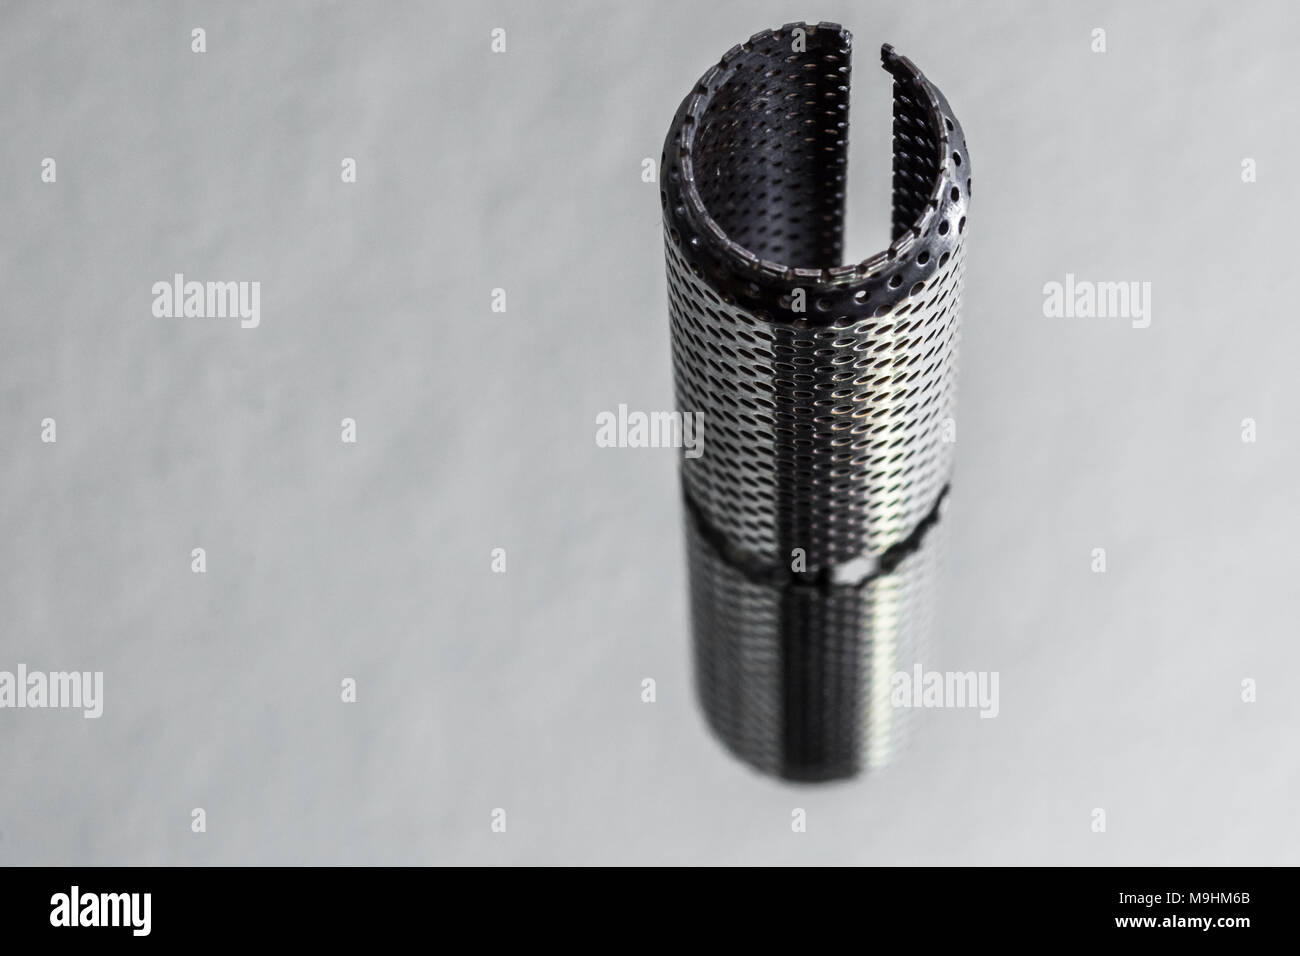 Close up of metallic manufactured object showing fine details Stock Photo